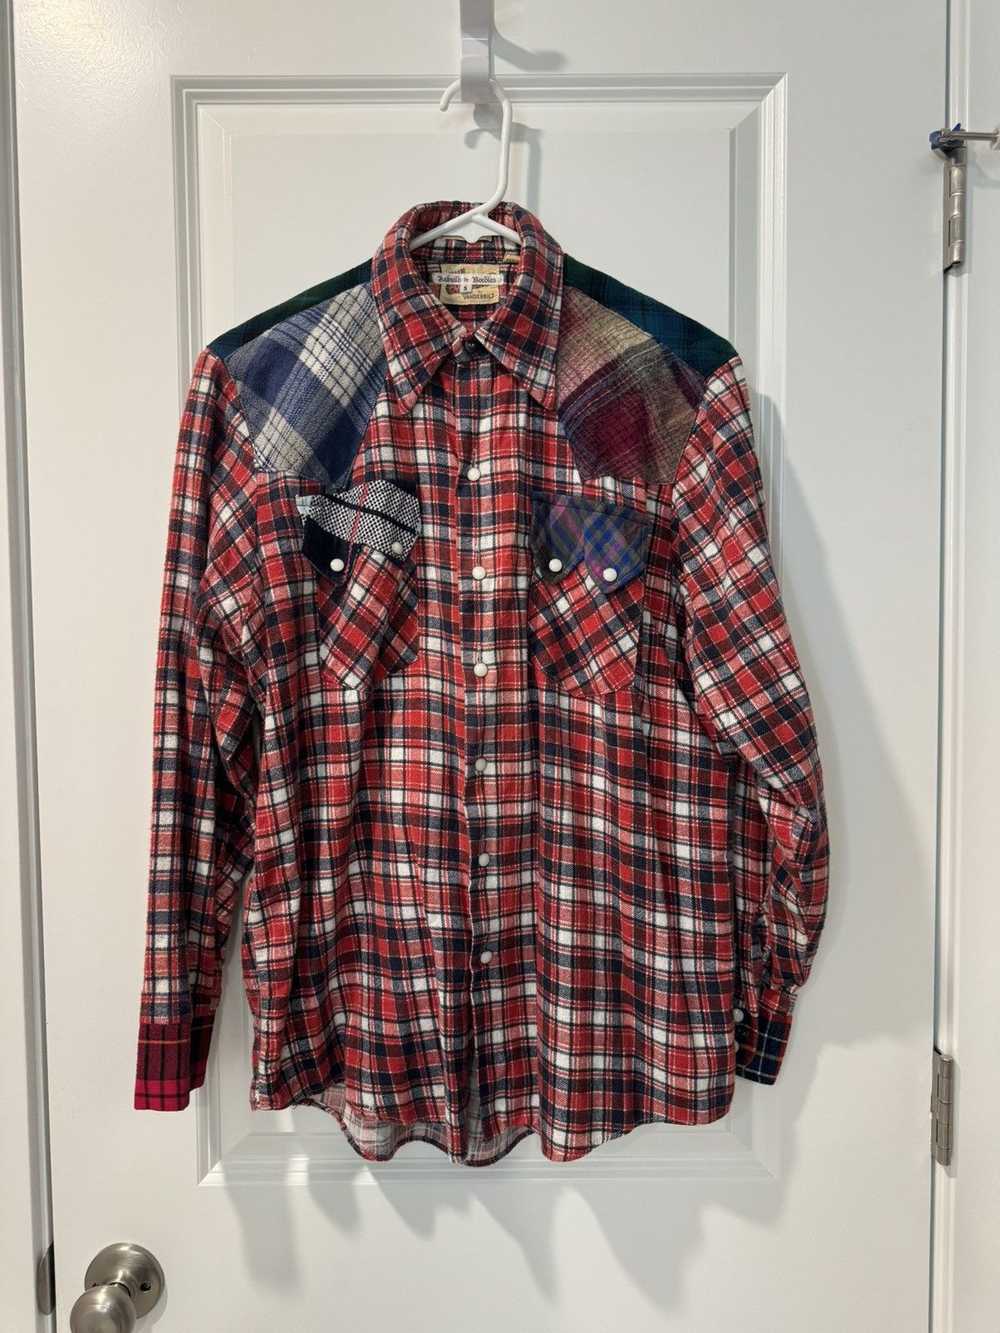 Needles Rebuild by Needles Flannel Button Up Shirt - image 1